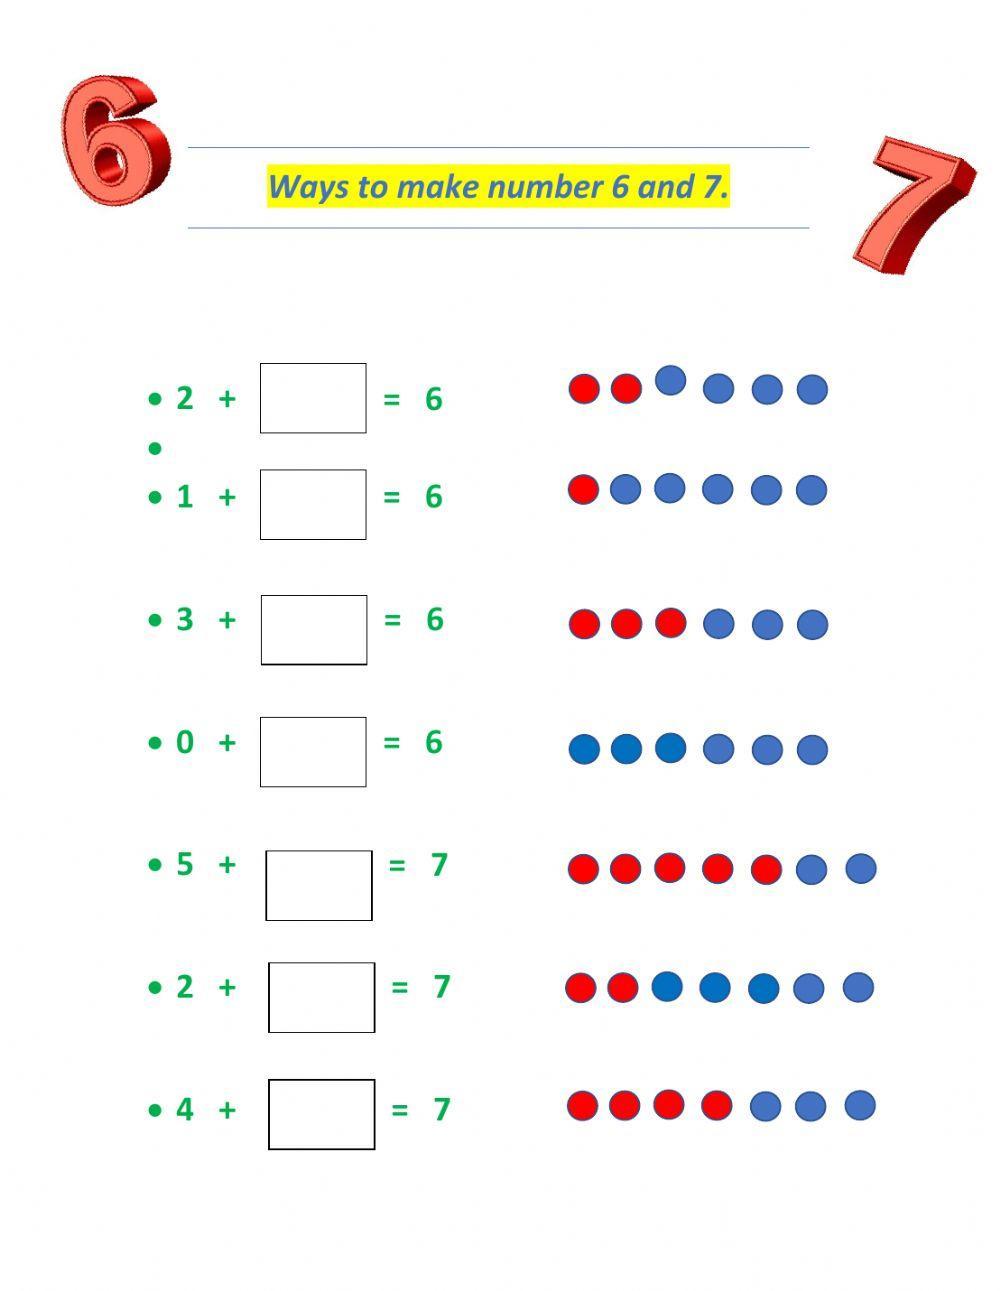 Ways to make 6 and 7